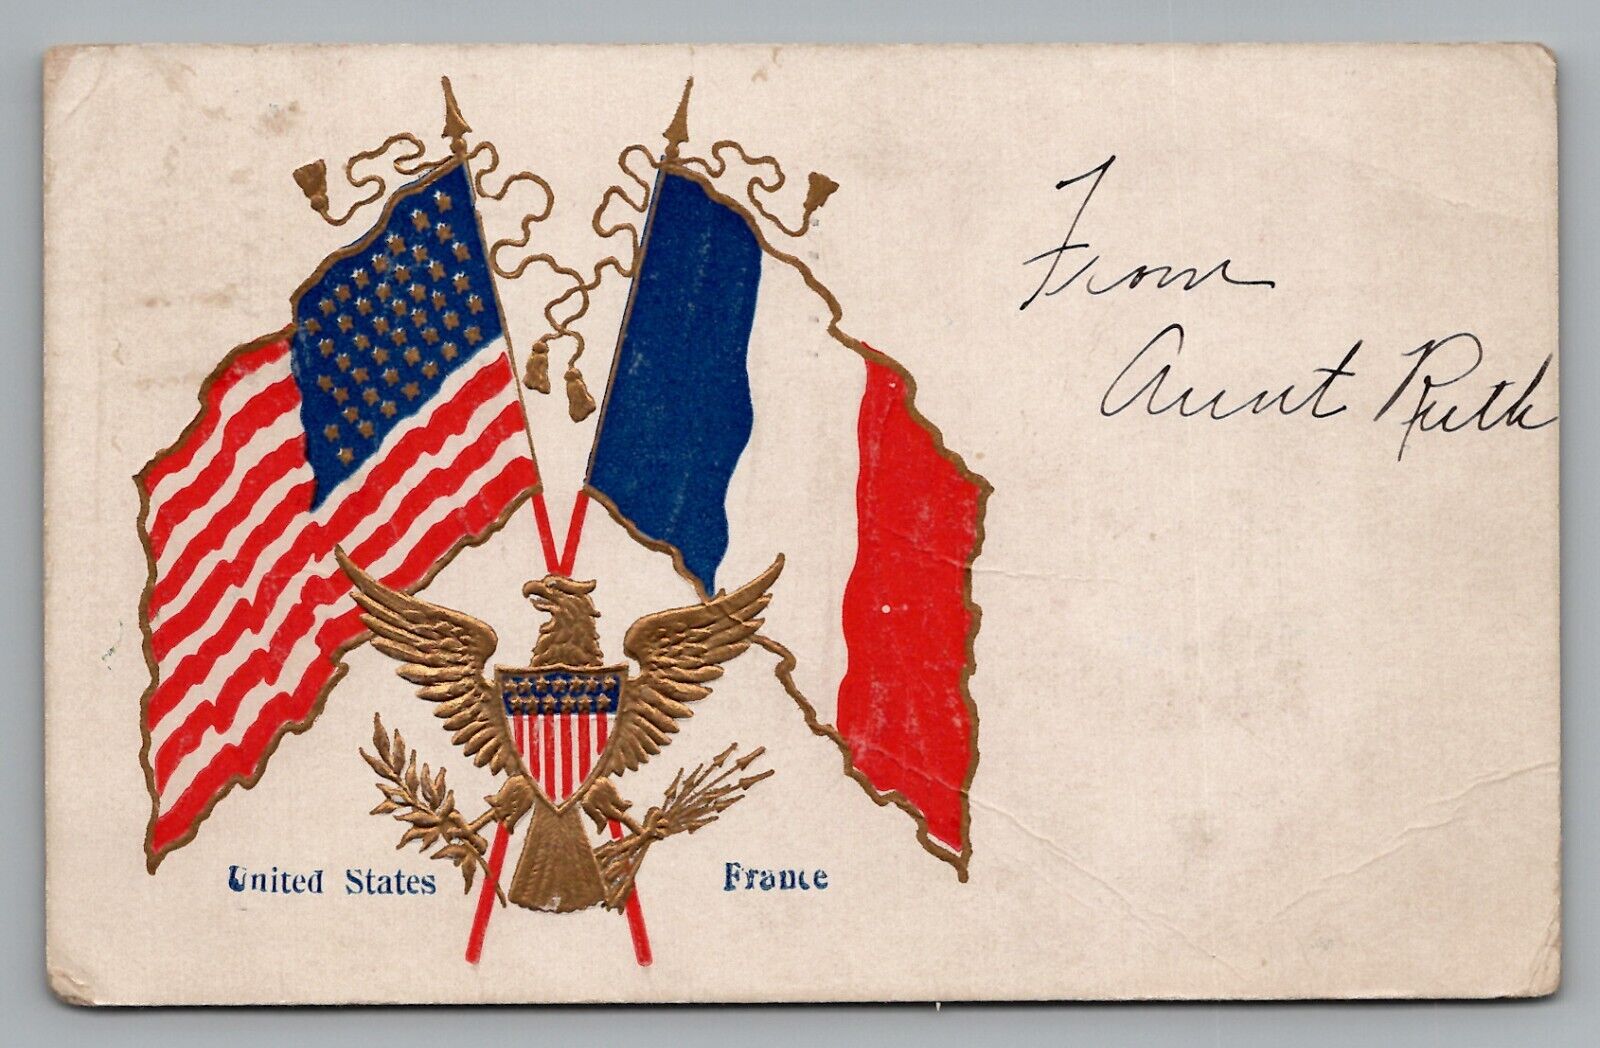 Patriotic United States and France Flags Media PA 1908 Cancel U.S. Allies